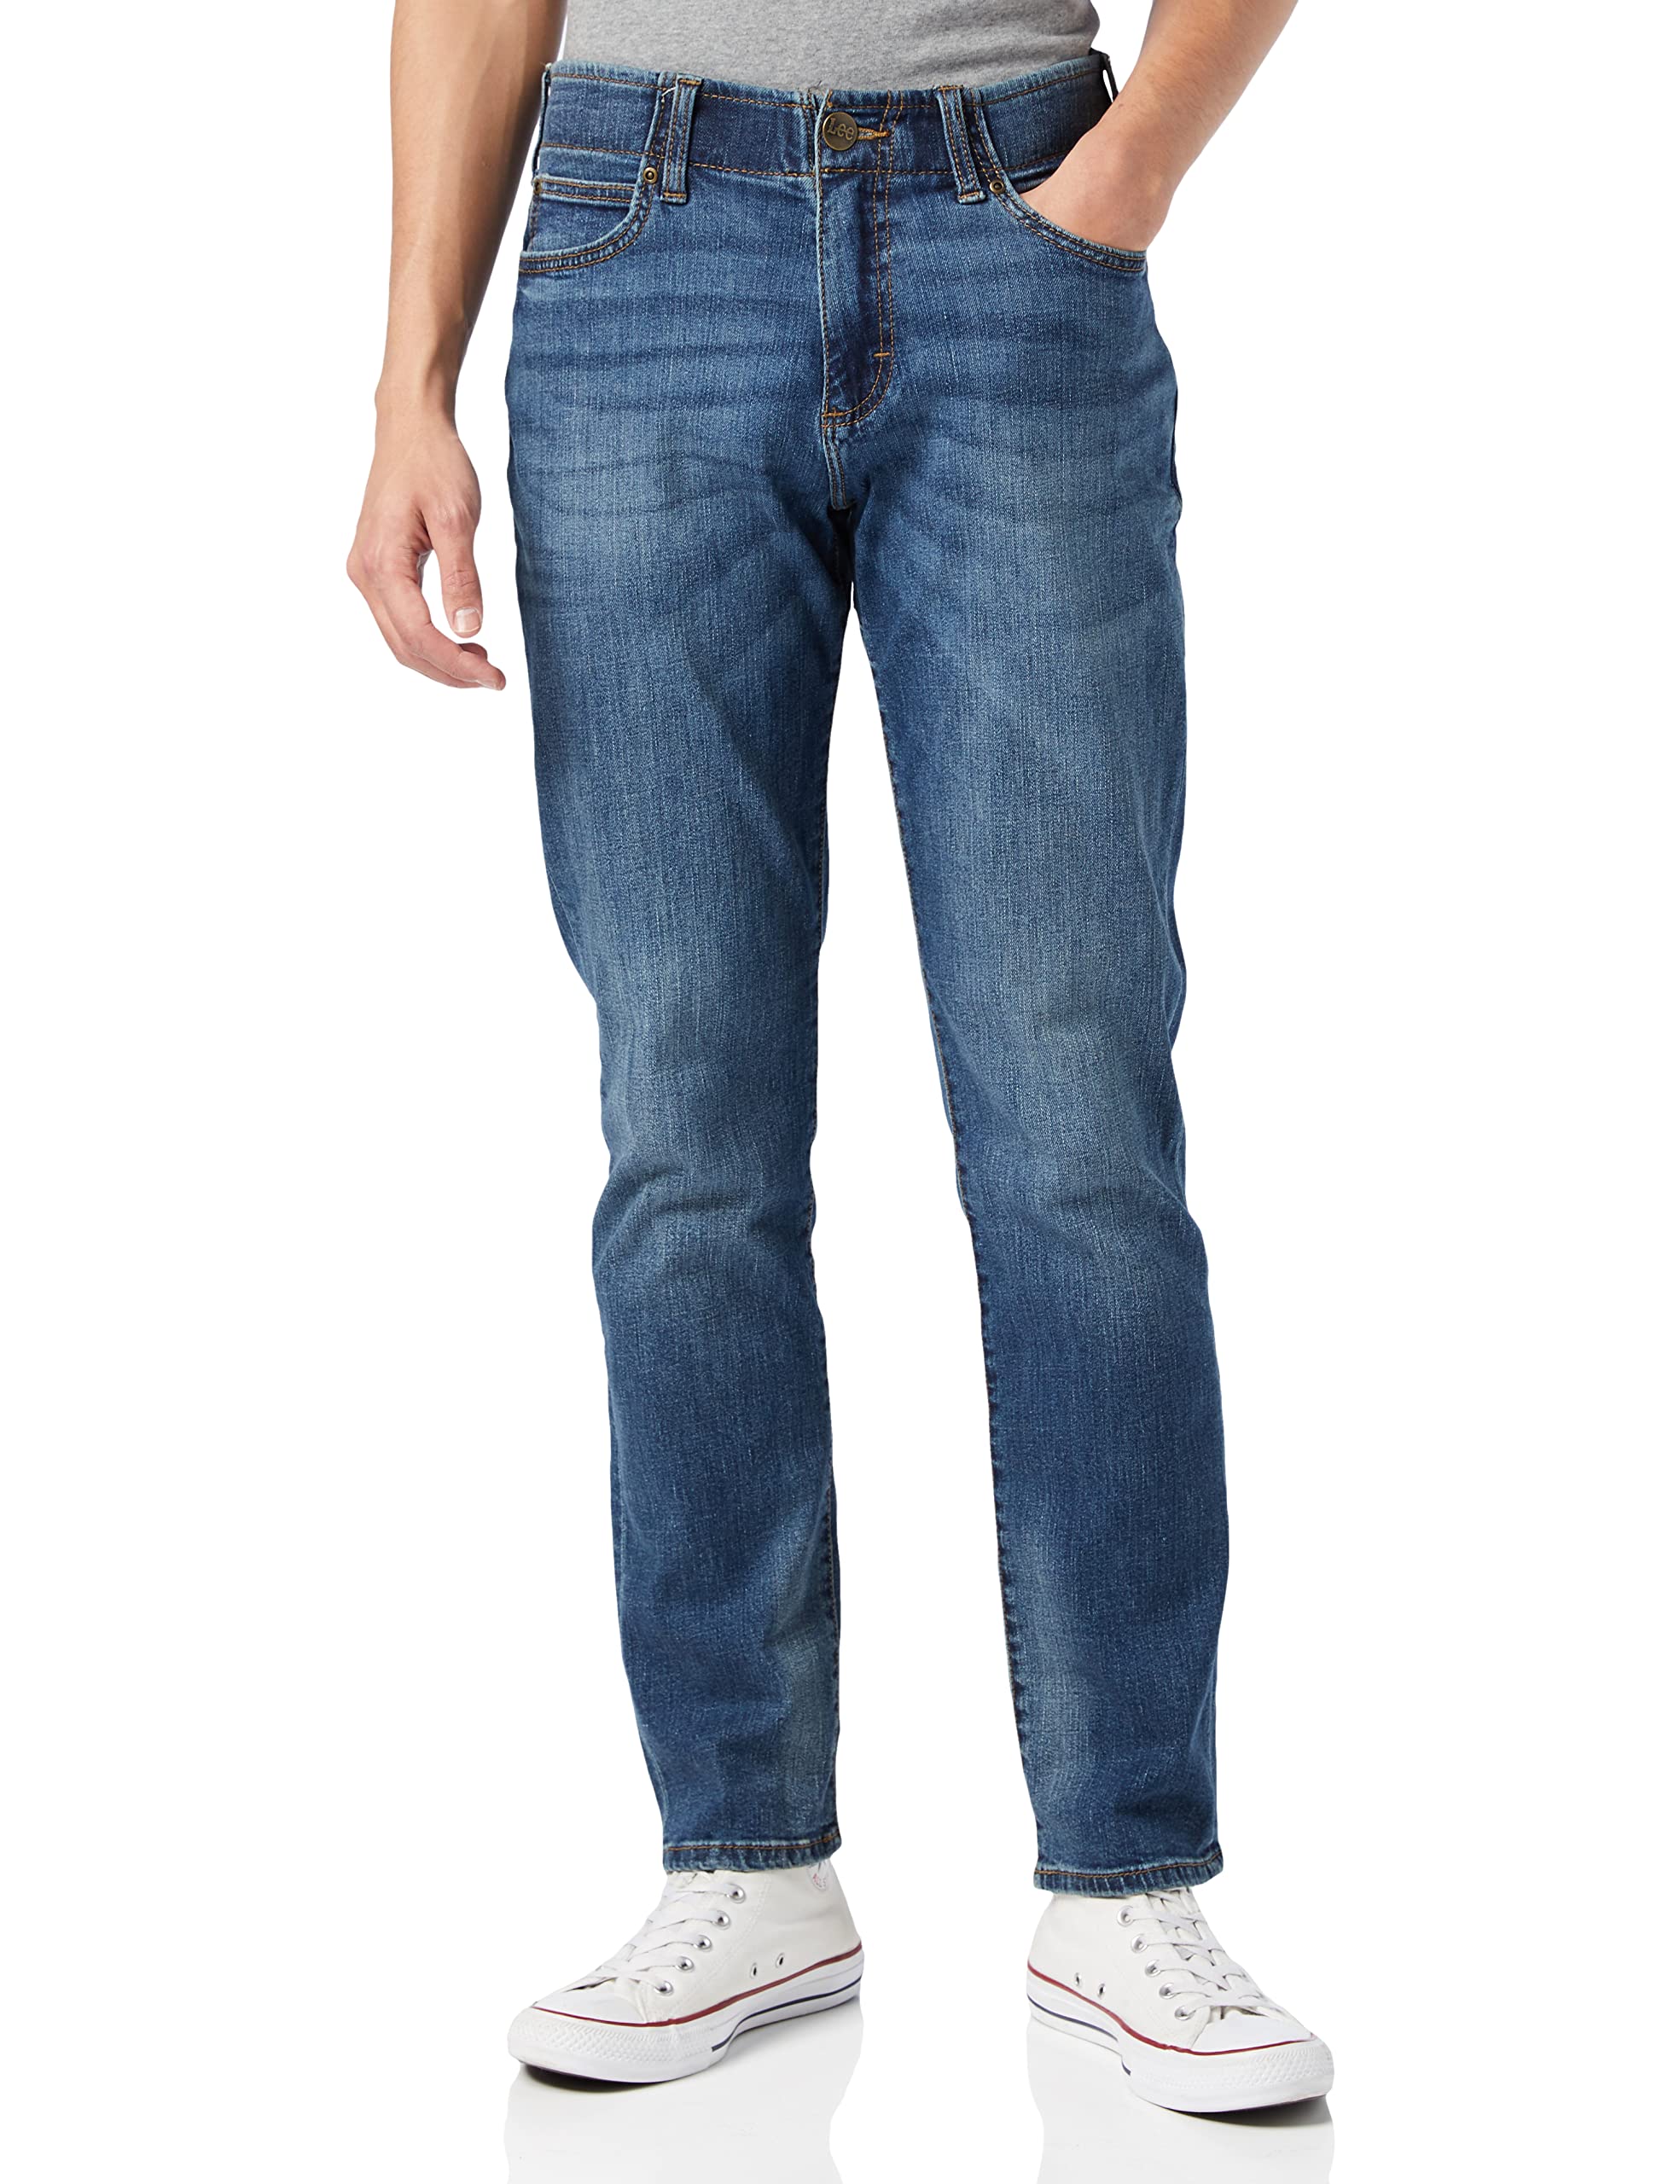 Lee Herren Straight Fit Xm Extreme Motion Jeans, Maddox, 32W / 34L